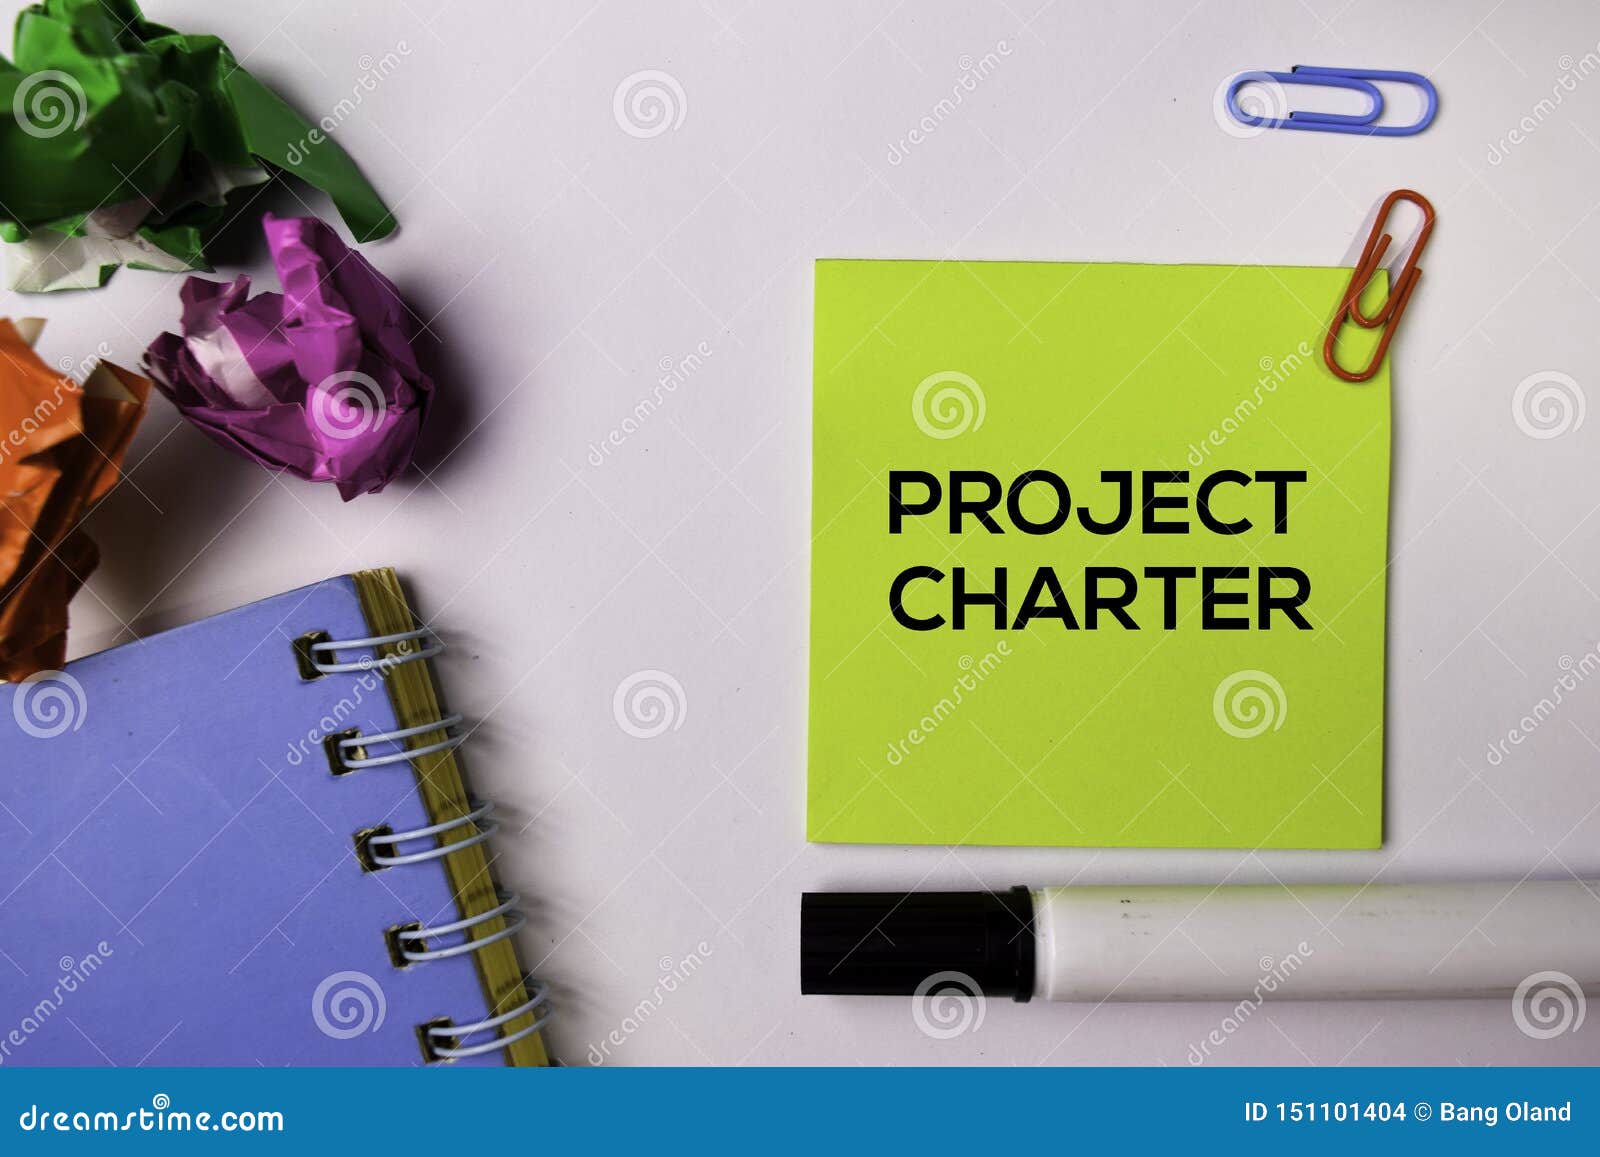 project charter on sticky notes  on white background